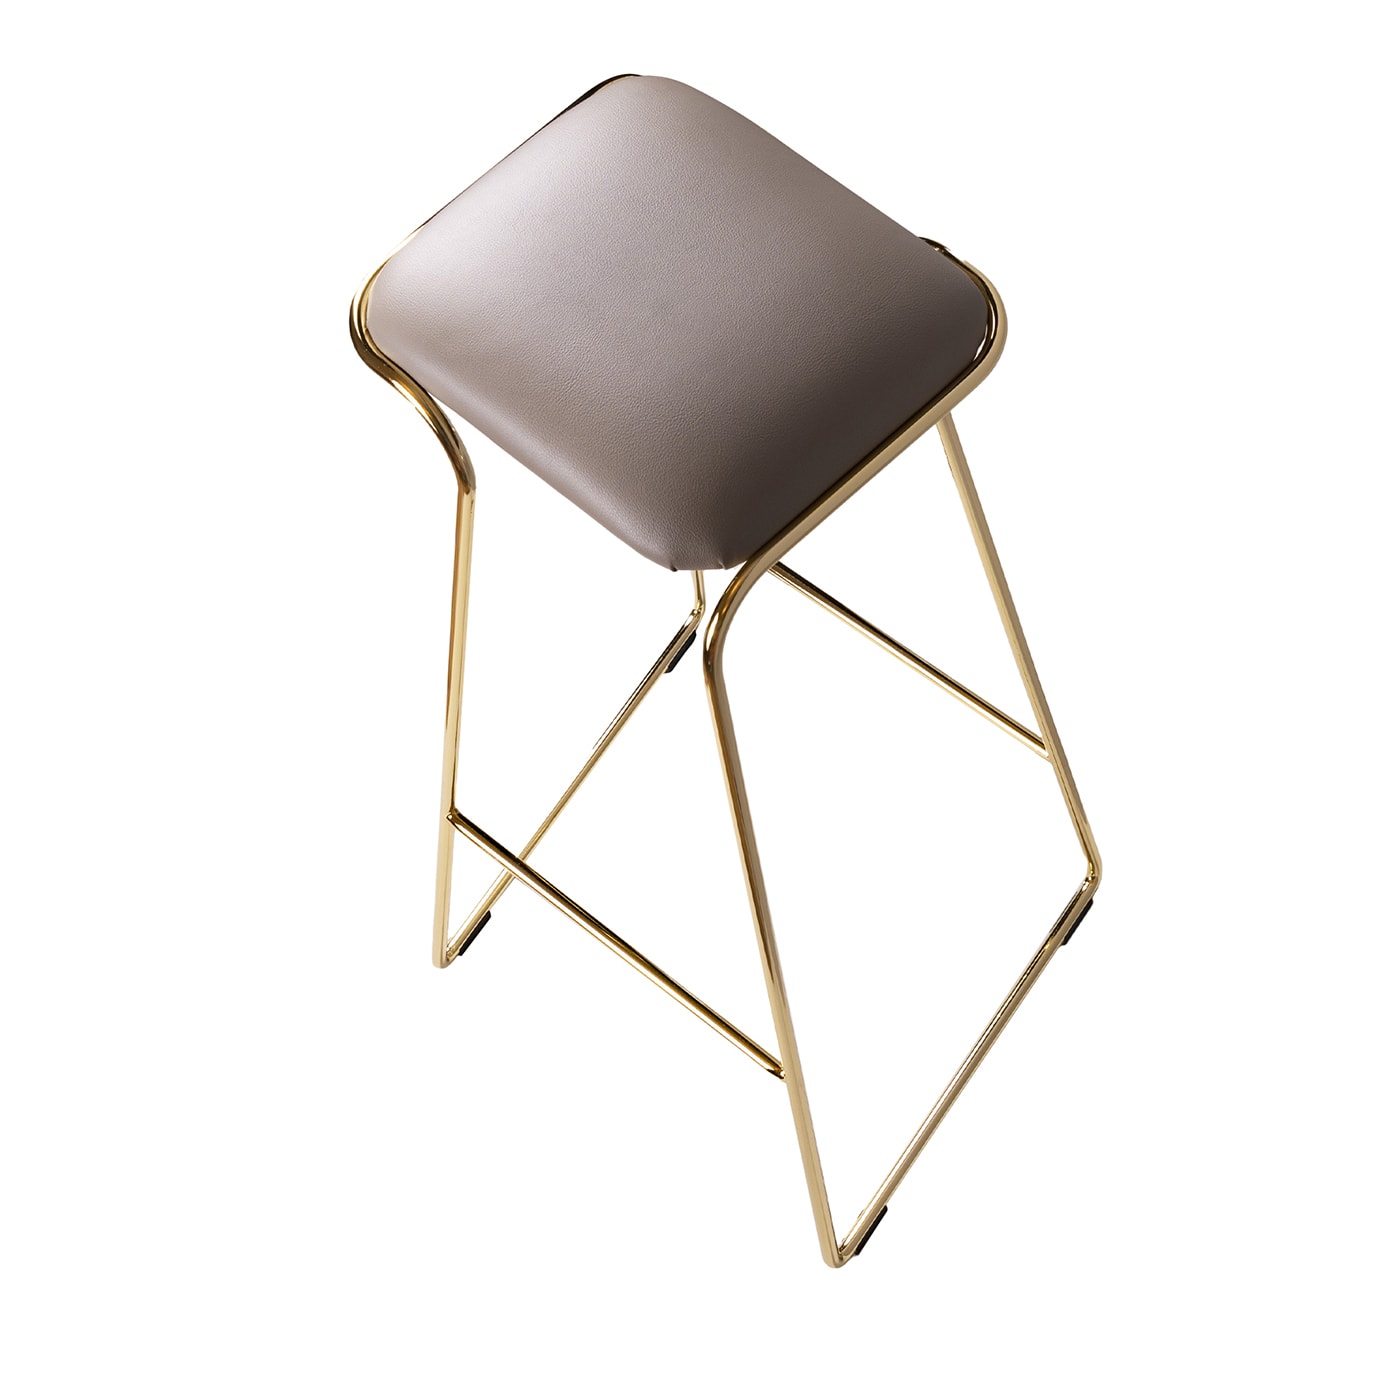 SEEMS SCULPTURAL GOLD AND LEATHER HI STOOL - Enrico Girotti